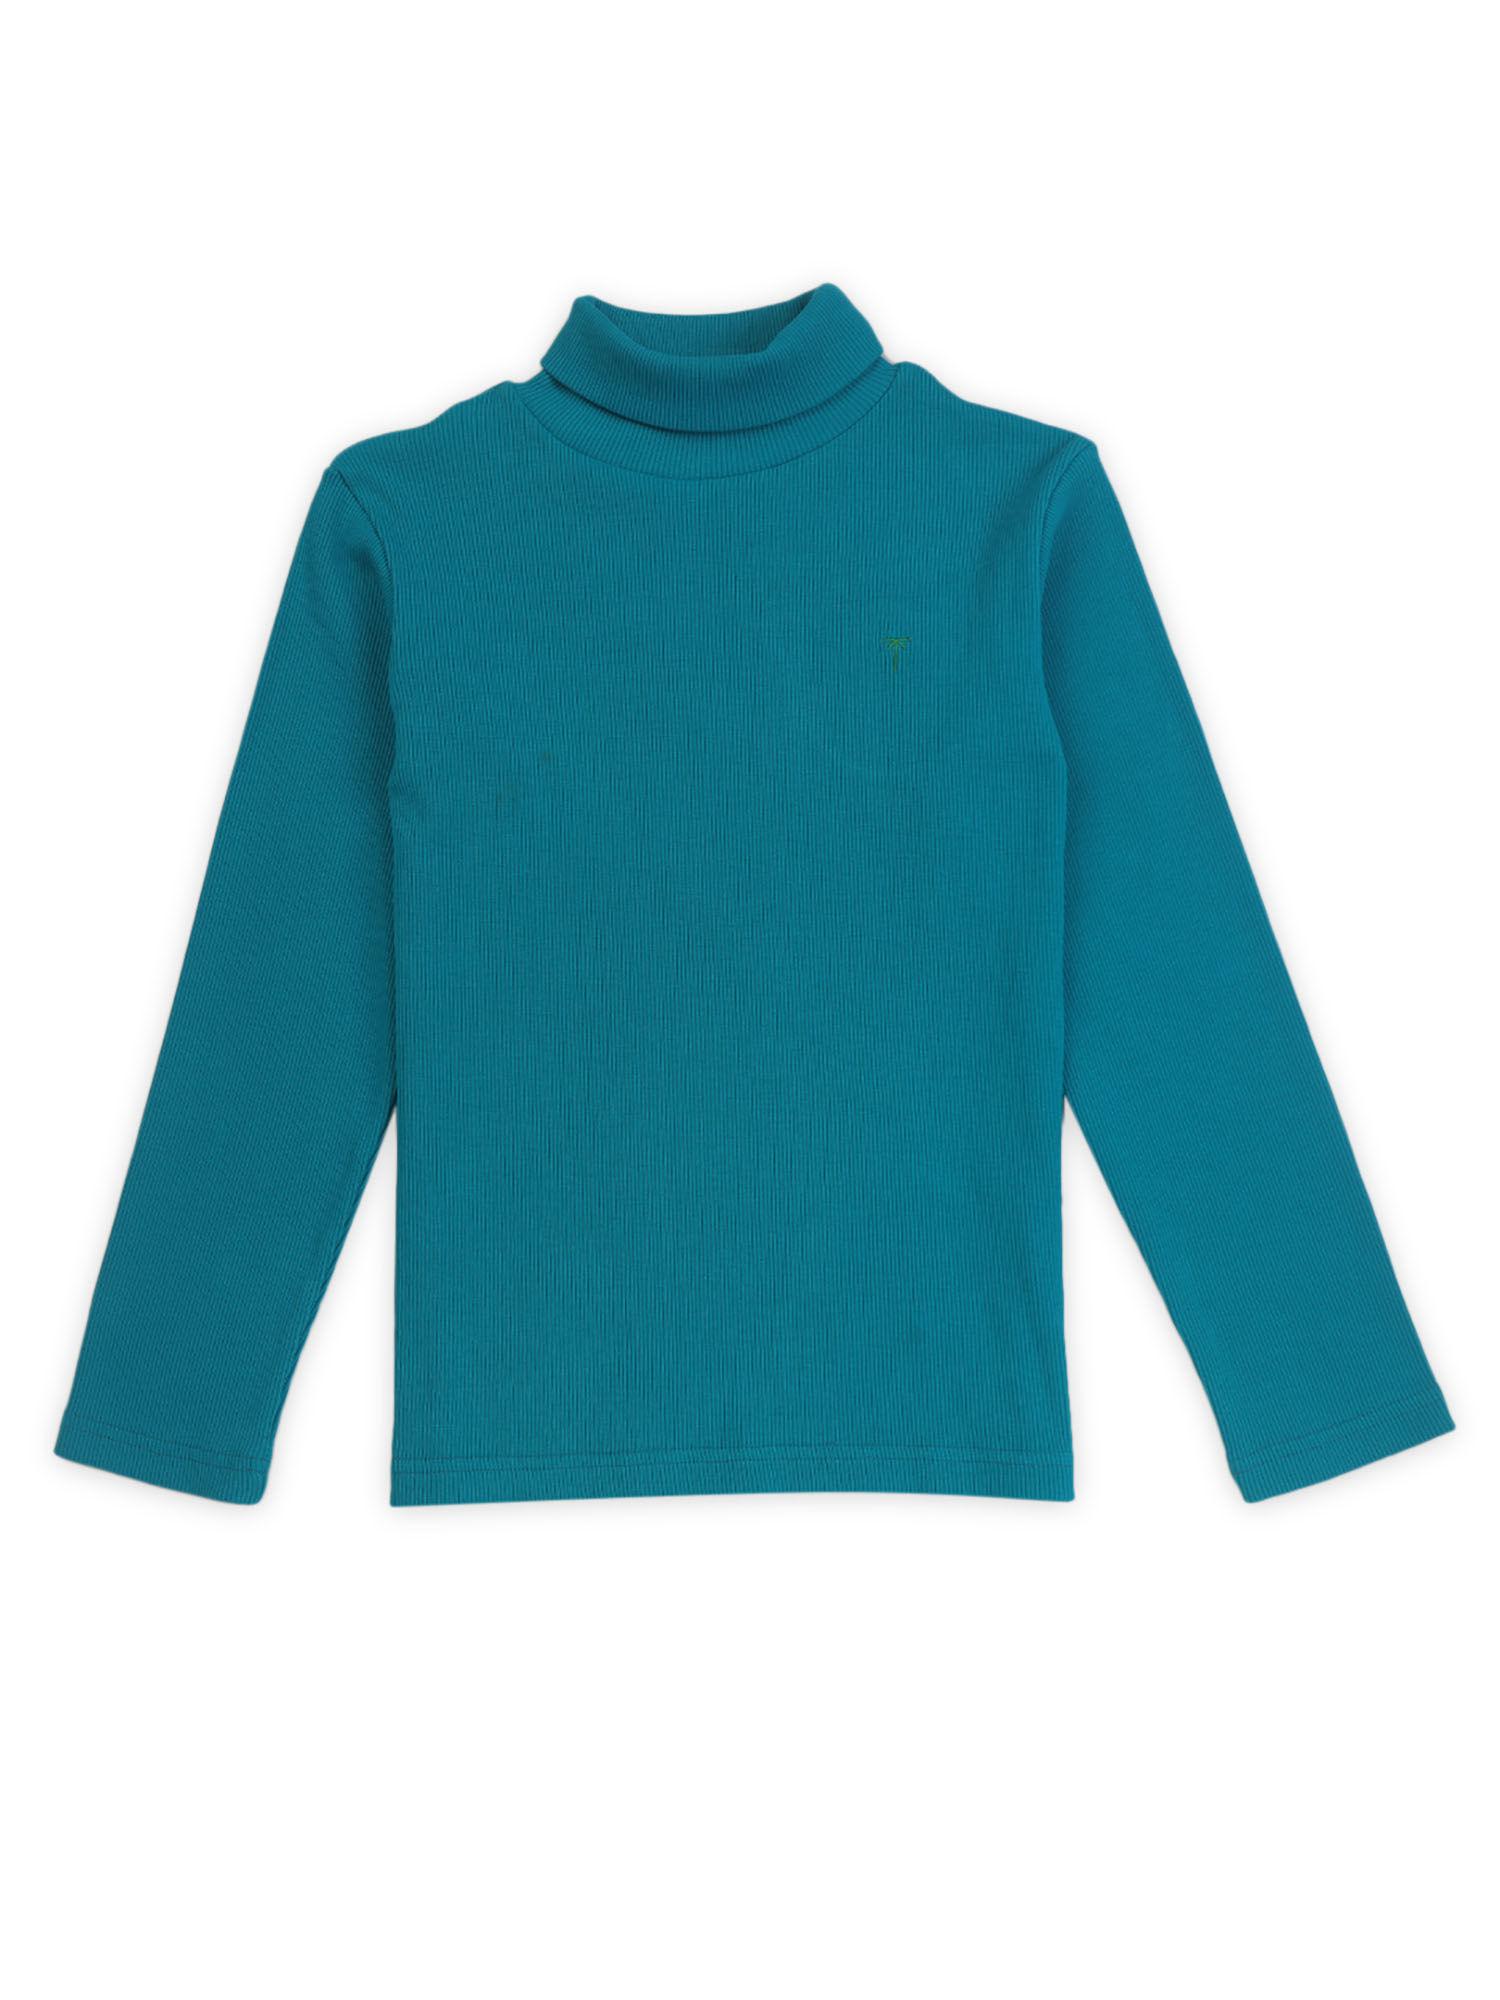 boys teal cotton solid t-shirt full sleeves